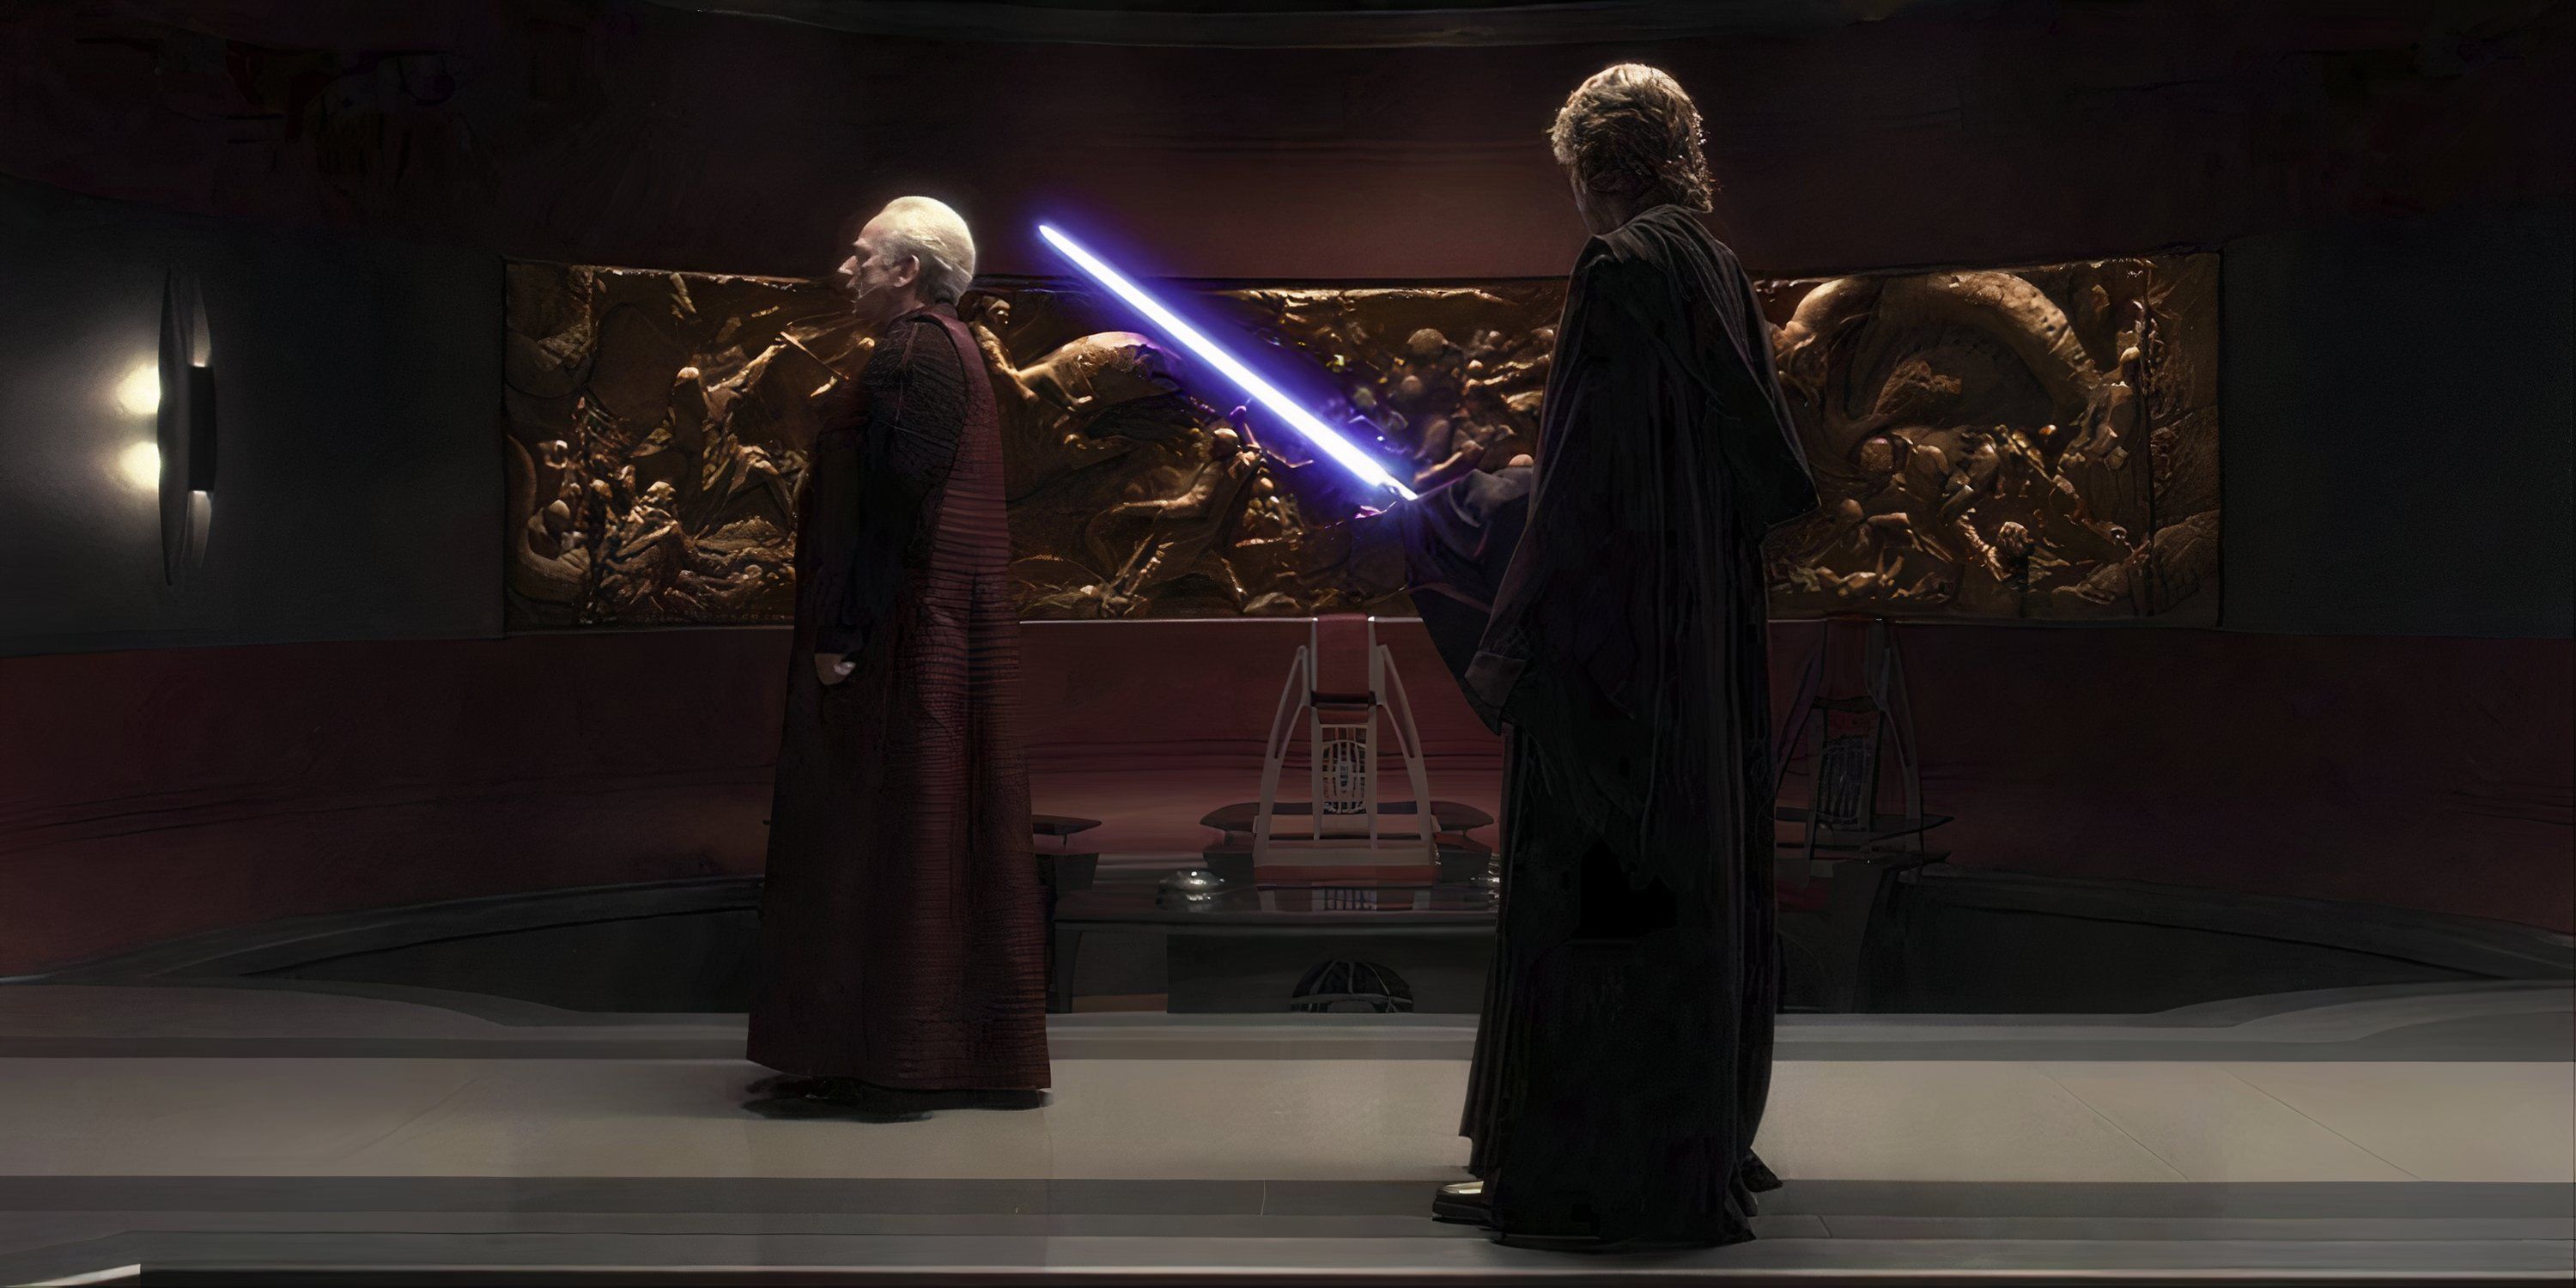 Anakin directs his lightsaber blade at Palpatine artwork of the Sith Empire.